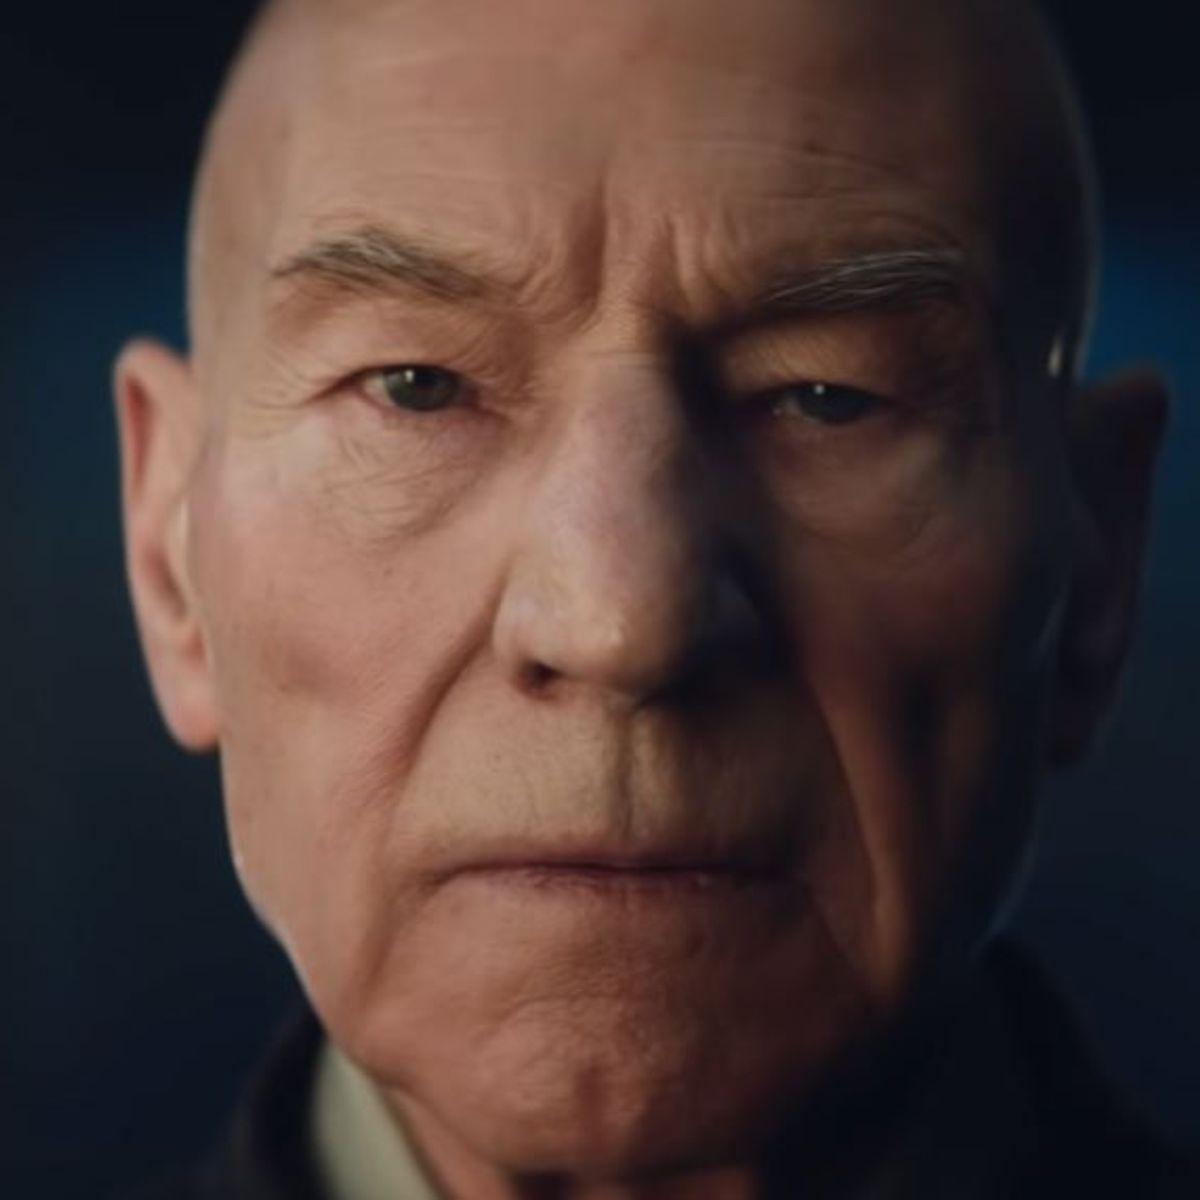 Star Trek: Picard teaser trailer gives first look at